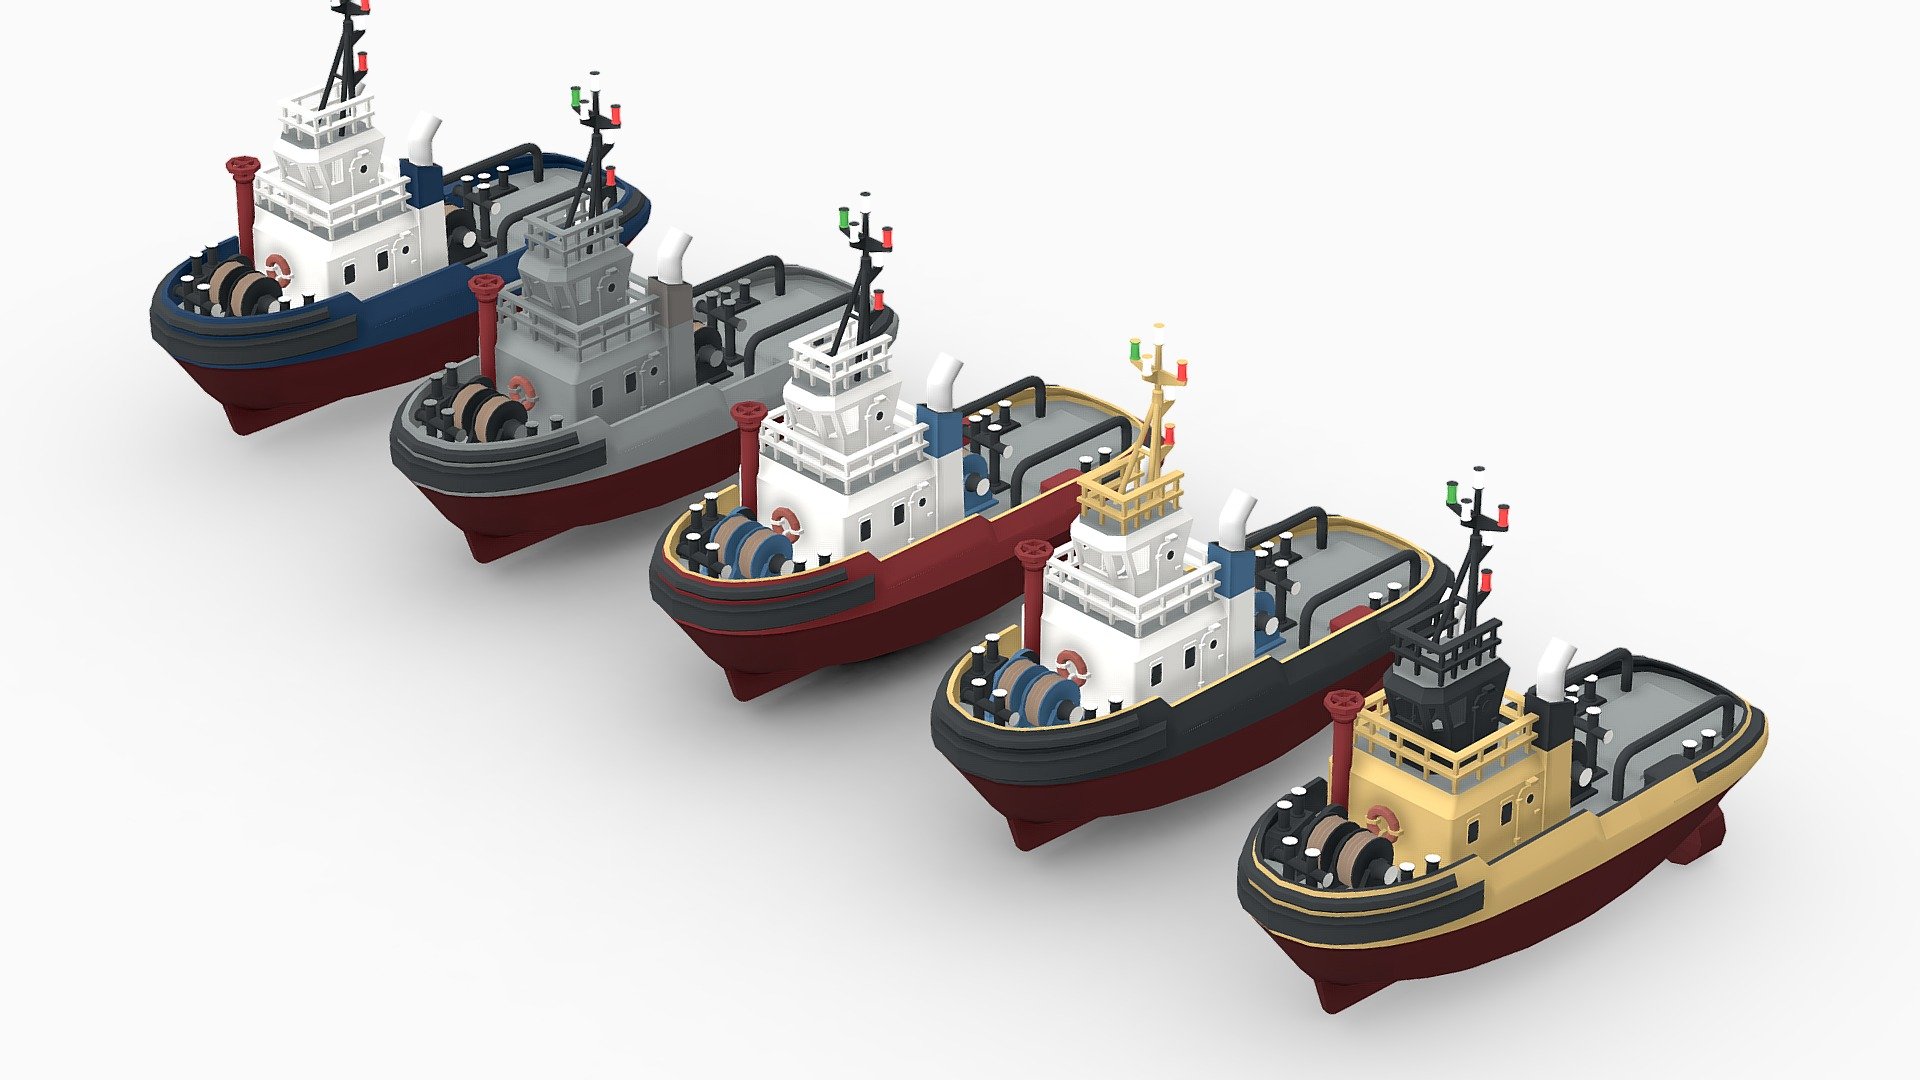 &ndash;FBX &ndash;OBJ &ndash;MAYA &ndash;MAX &ndash;BLENDER&ndash;

Lowpoly style tug ship model.

Five paint options and an emission map.

The model is at the center of coordinates 3d model